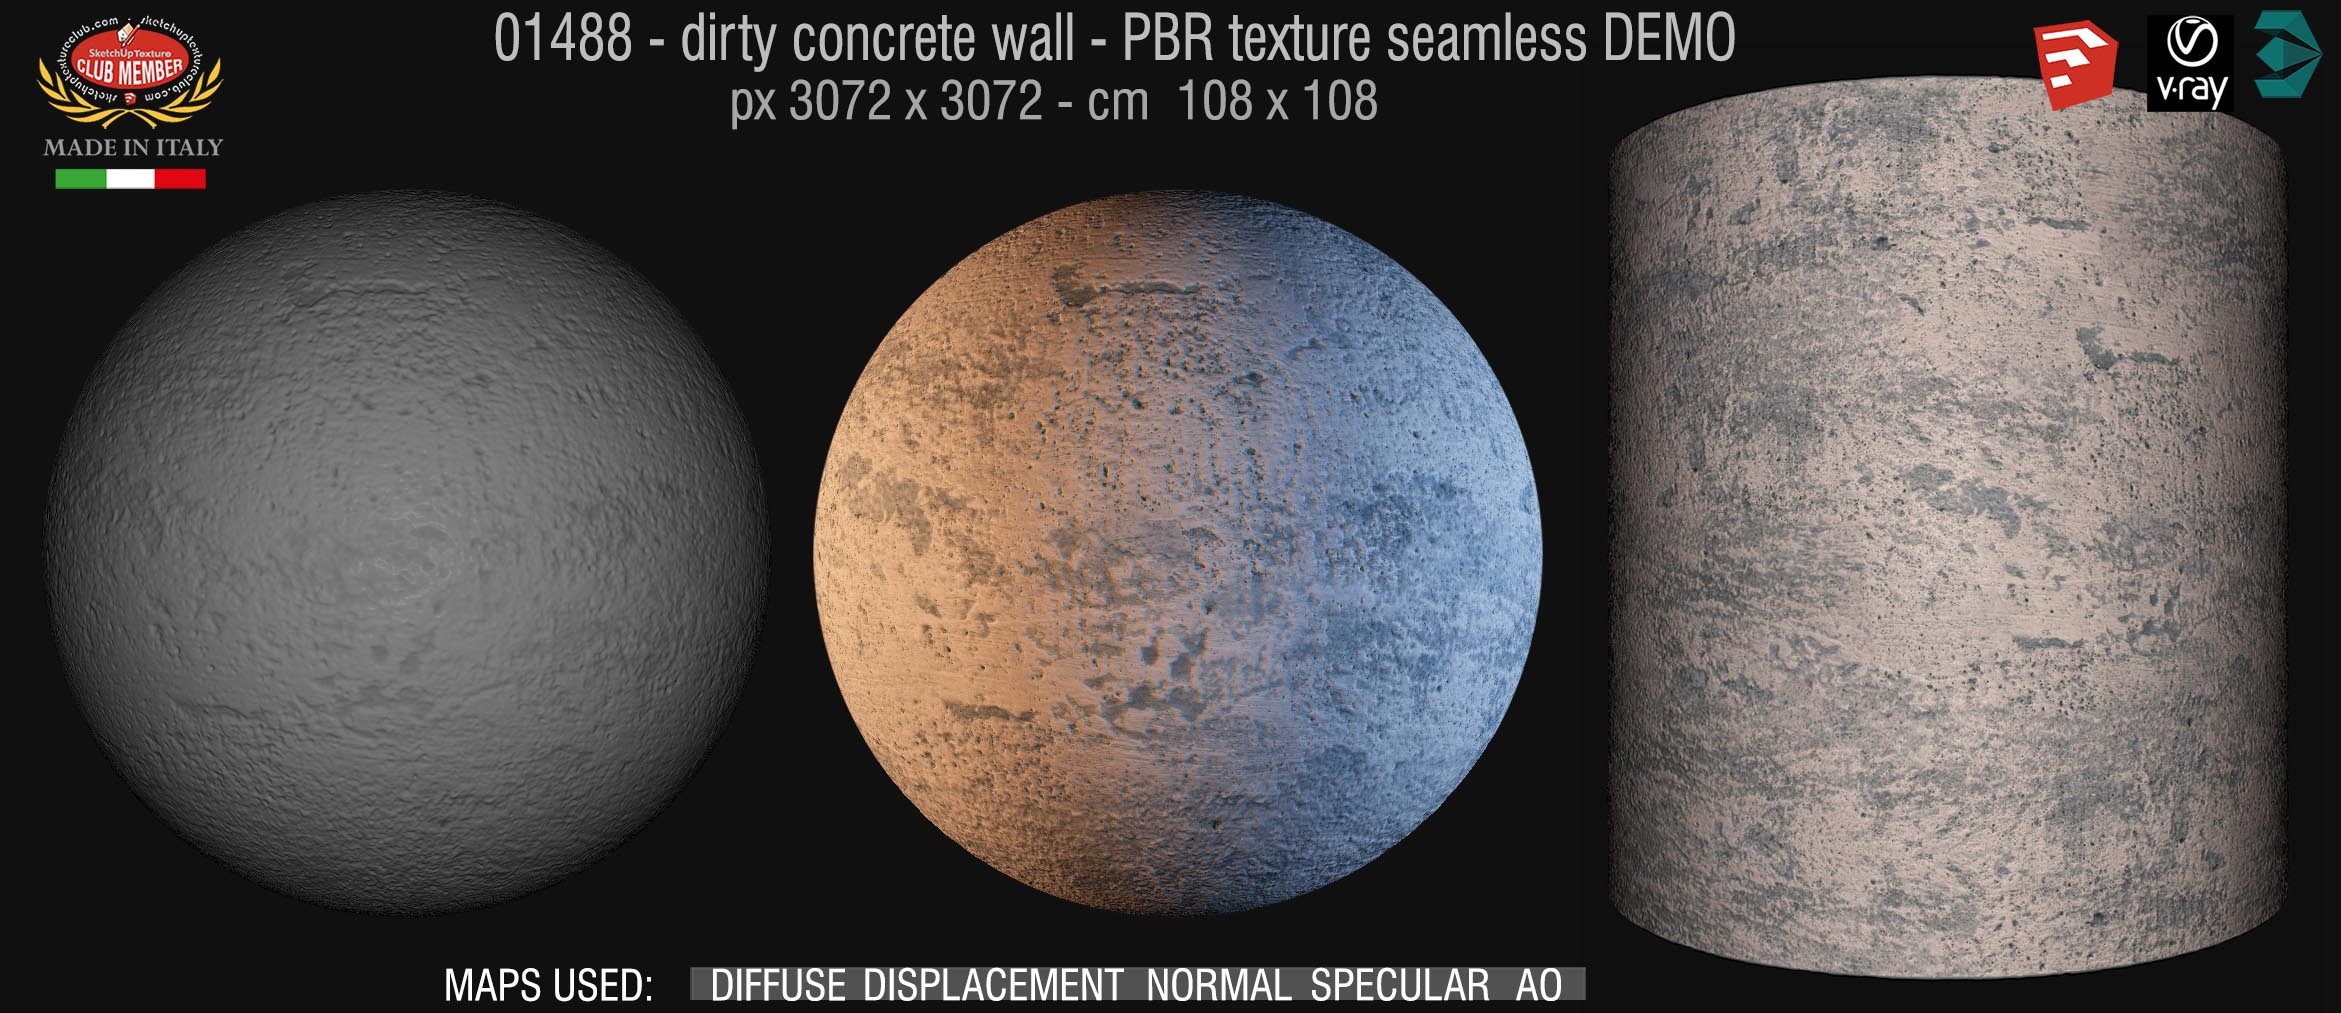 01488 Concrete bare dirty wall PBR texture seamless DEMO